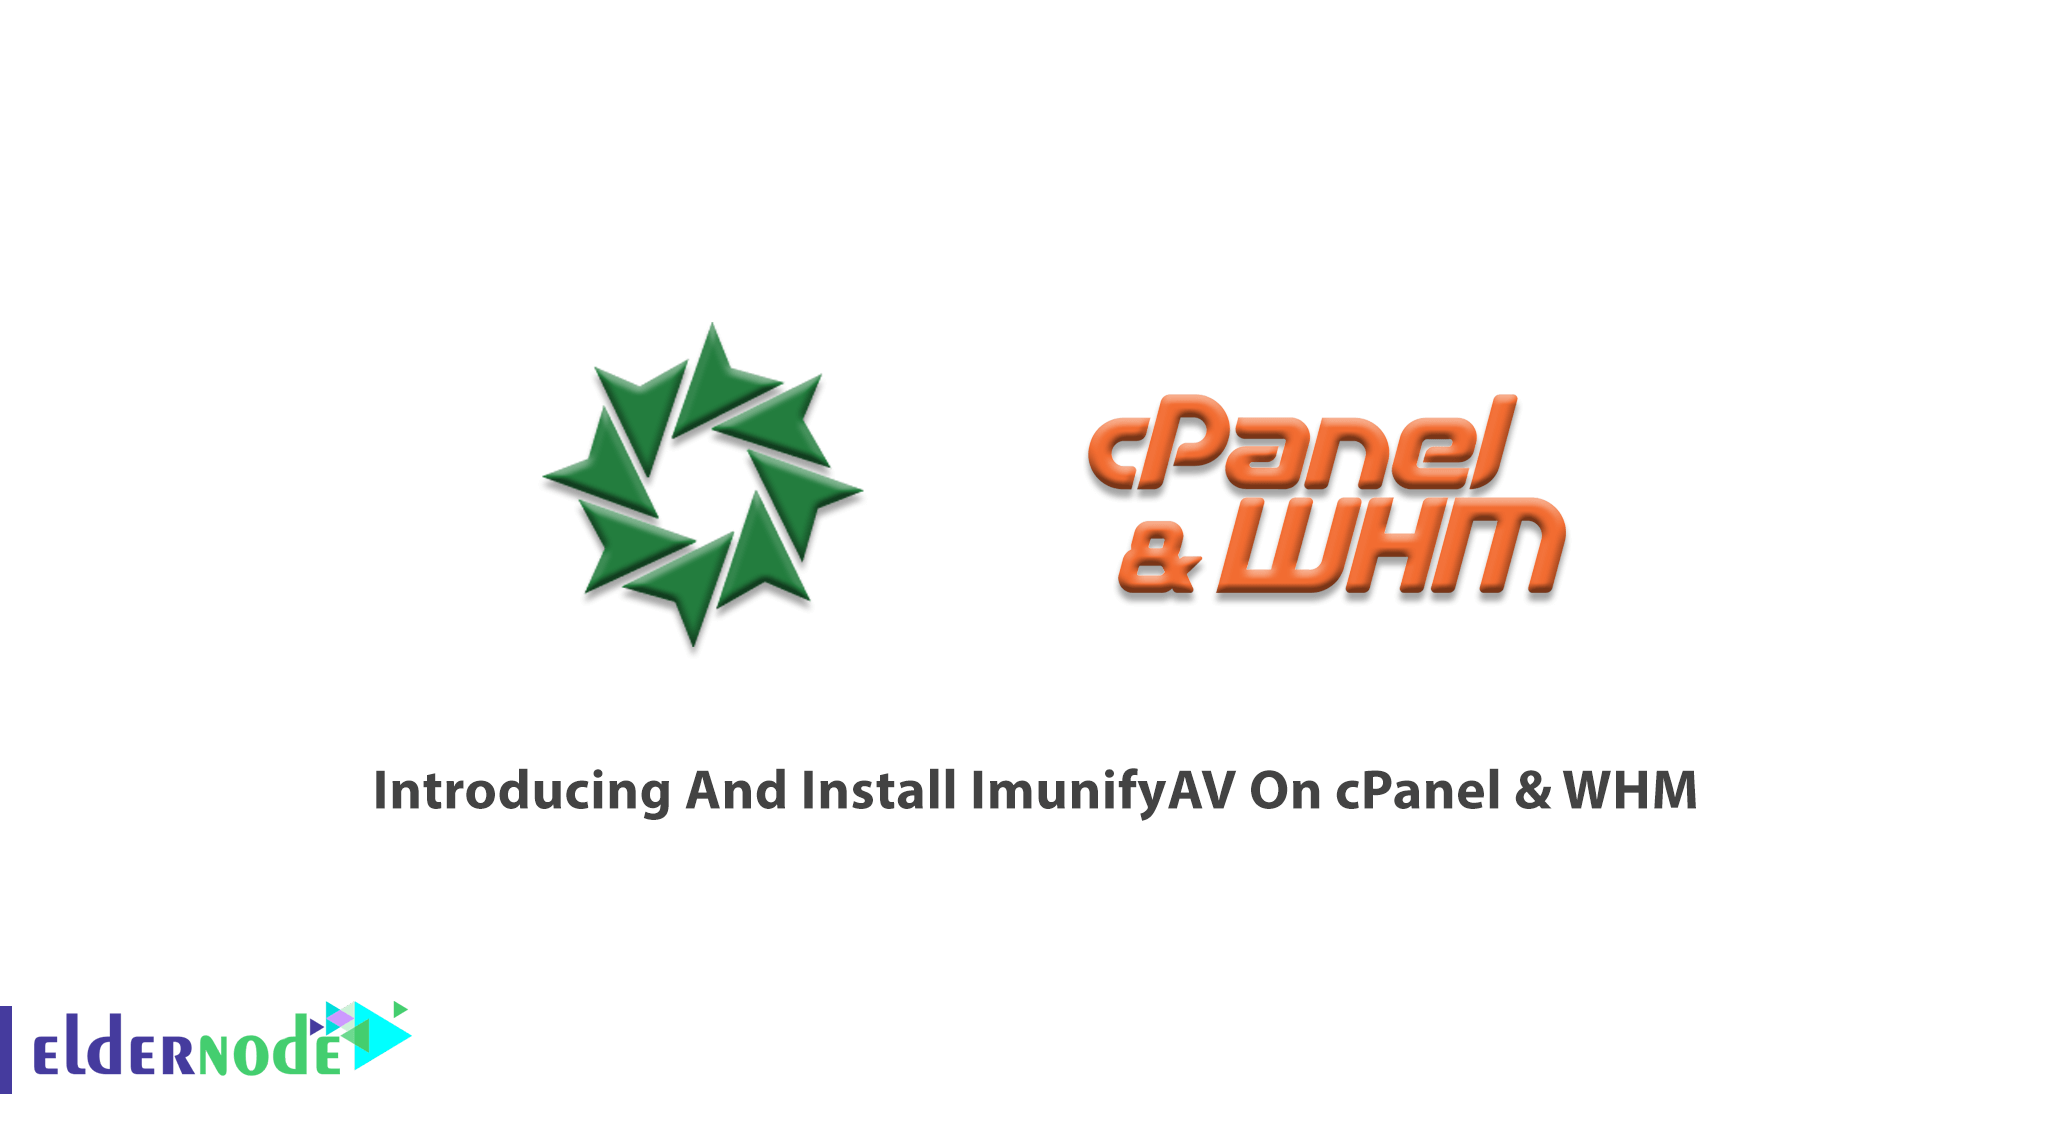 Introducing And Install ImunifyAV On cPanel & WHM